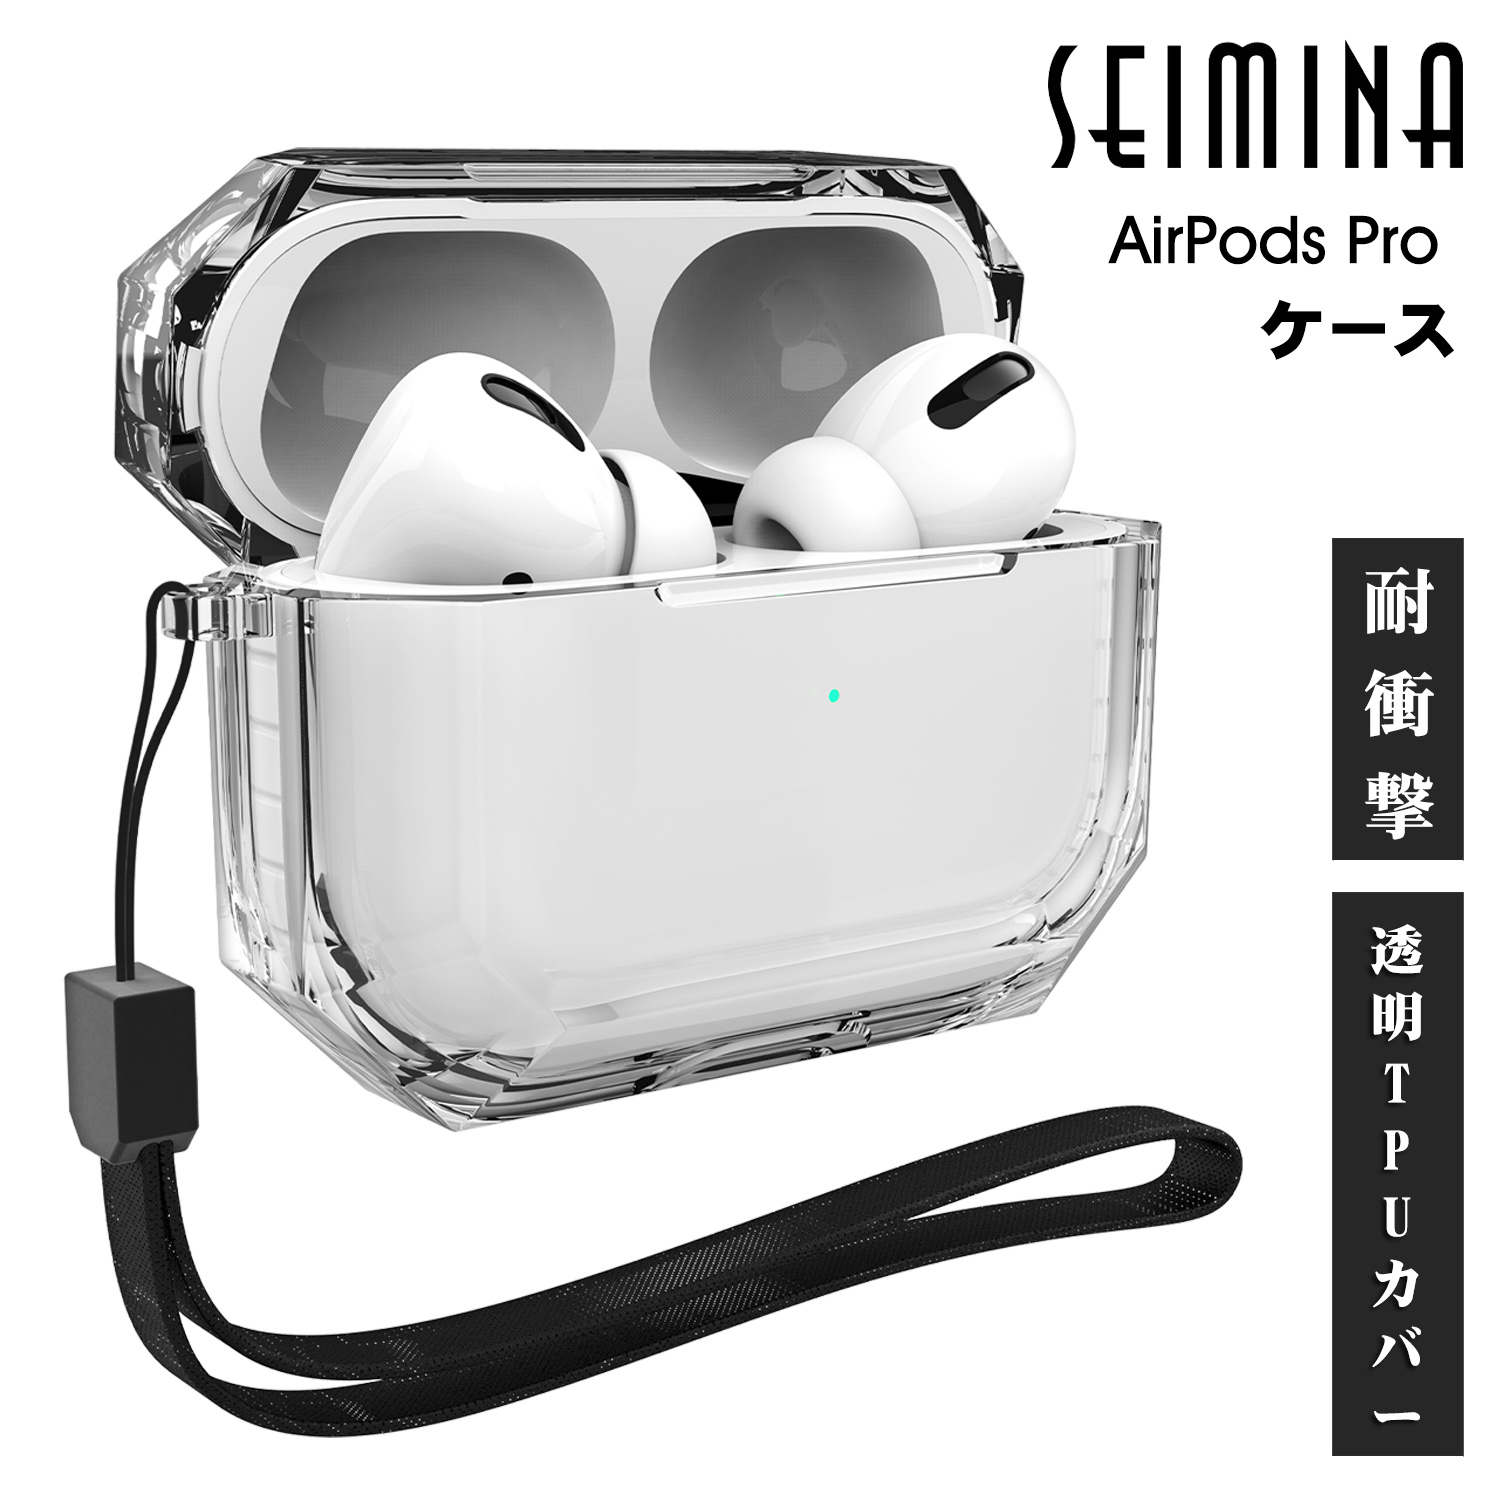 ★airpods proケース AirPods pro 2ケース AirPods Pro 1ケース AirPodsカバー 透明 エアーポッズ クリアケース AirPodsプロケース air pods エアポッズケース エアポッド ポッズ 全面保護カバー 落下防止 耐衝撃 装着充電可能 airpods pro 第一 二世代